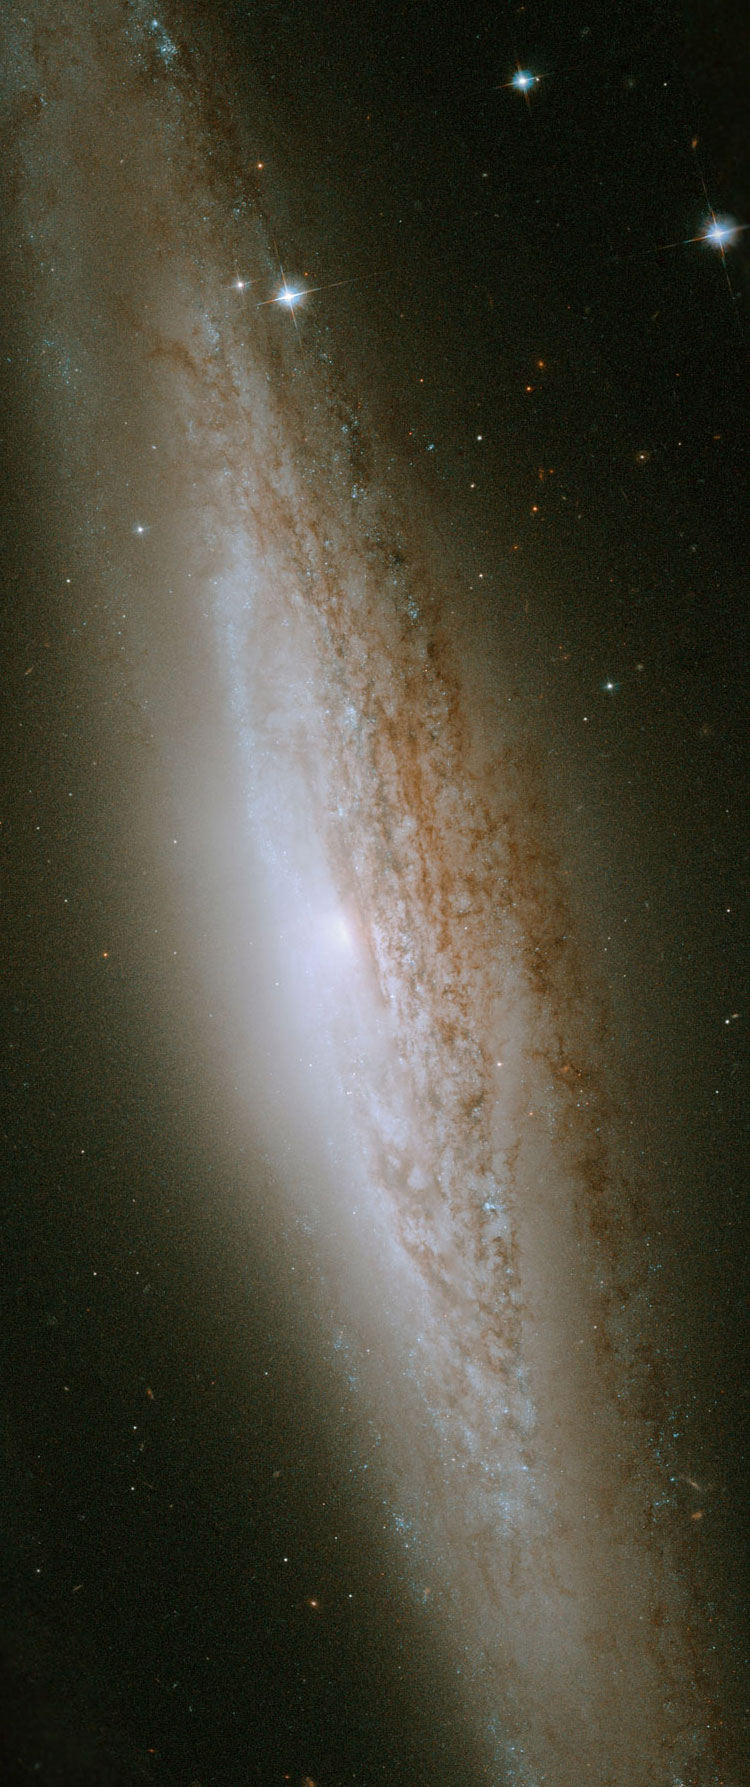 HST image of most of spiral galaxy NGC 2683